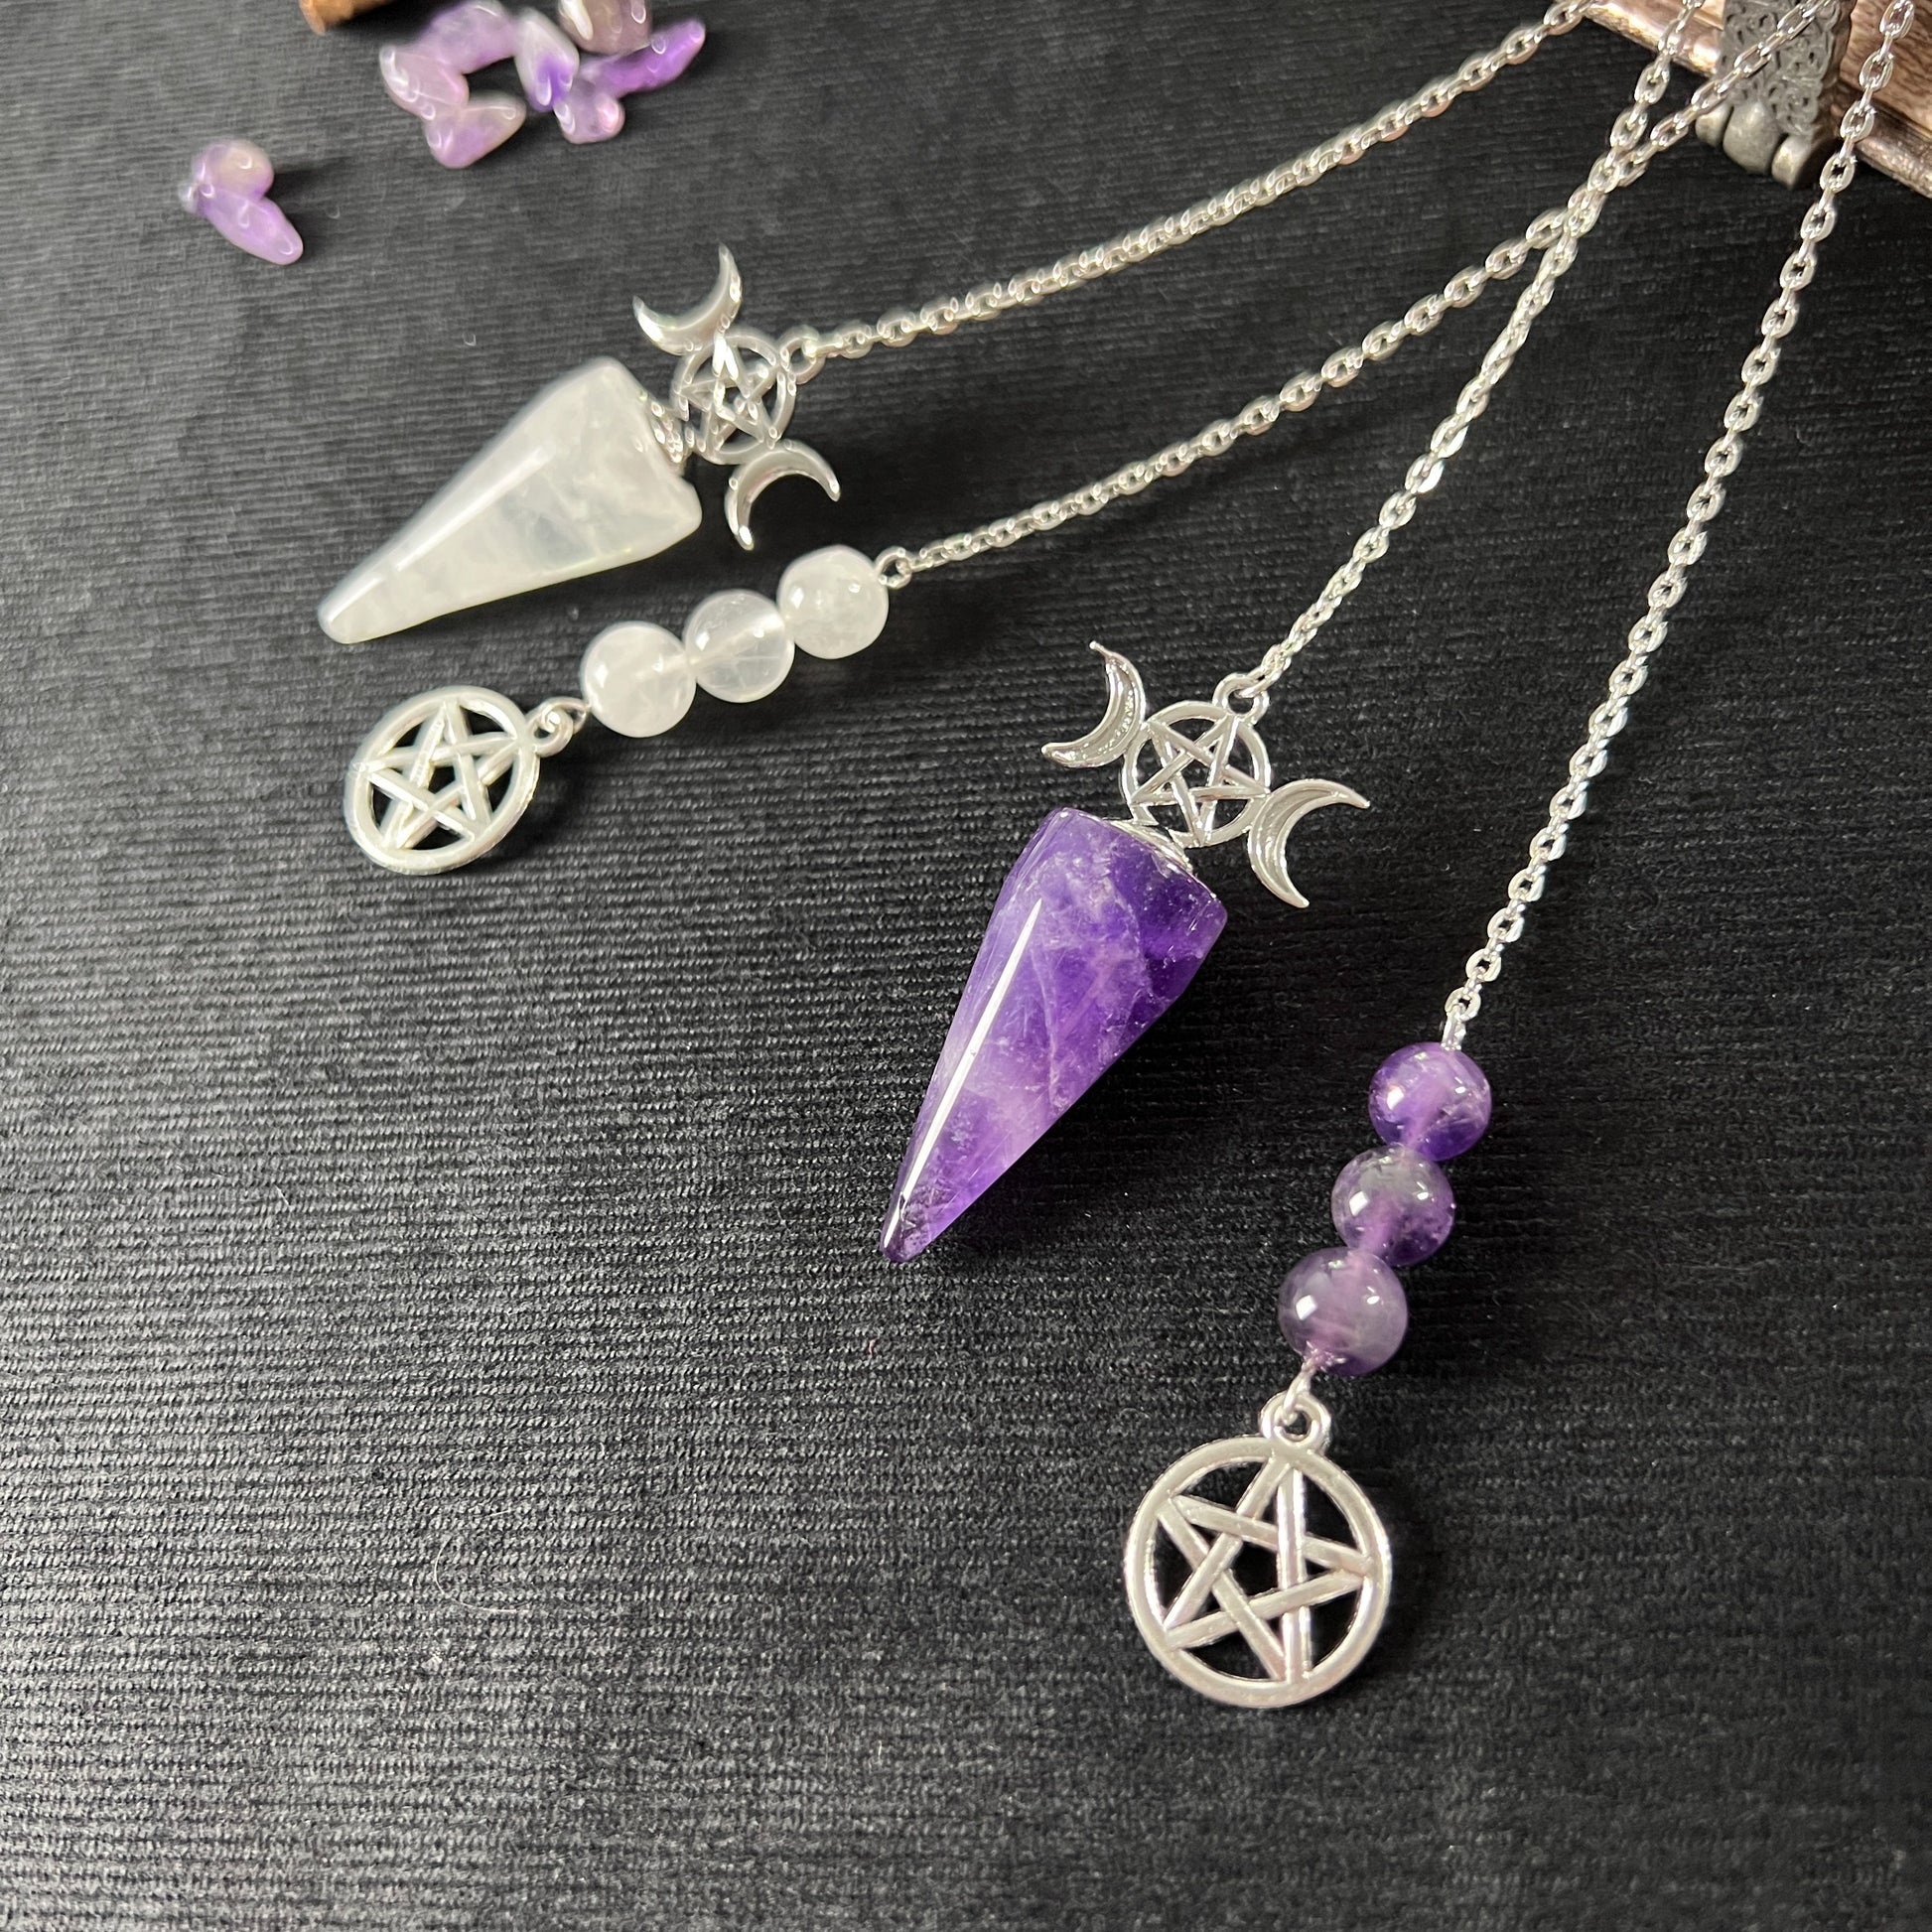 gemstone divination dowsing pendulum triple moon pentacle wiccan pagan witch wizard tool amethyst clear quartz